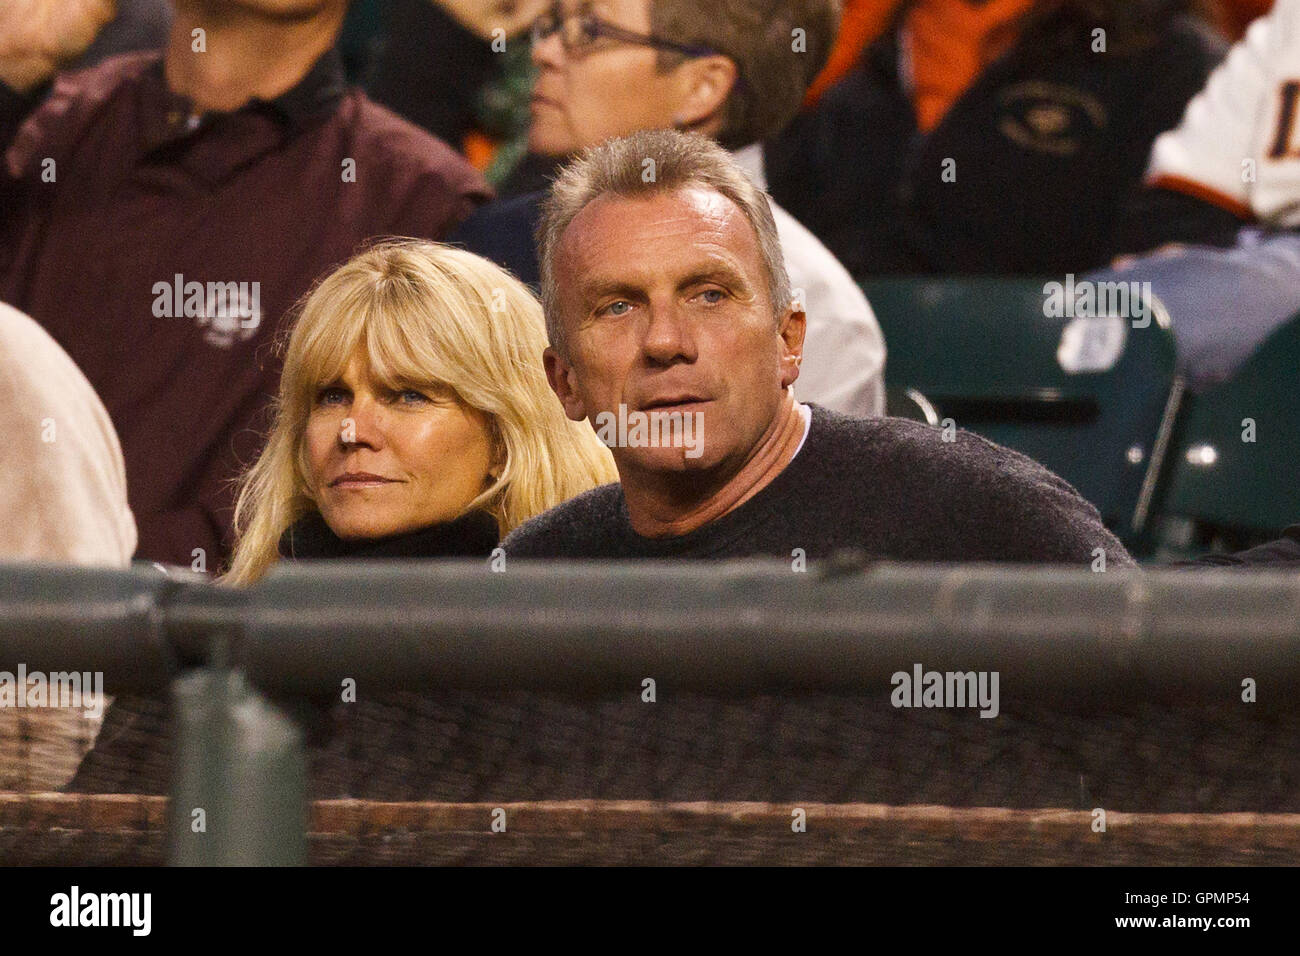 September 15, 2010; San Francisco, CA, USA;  Former San Francisco 49ers quarterback Joe Montana (right) and his wife Jennifer Montana (left) watch the game between the San Francisco Giants and the Los Angeles Dodgers with during the first inning at AT&T P Stock Photo